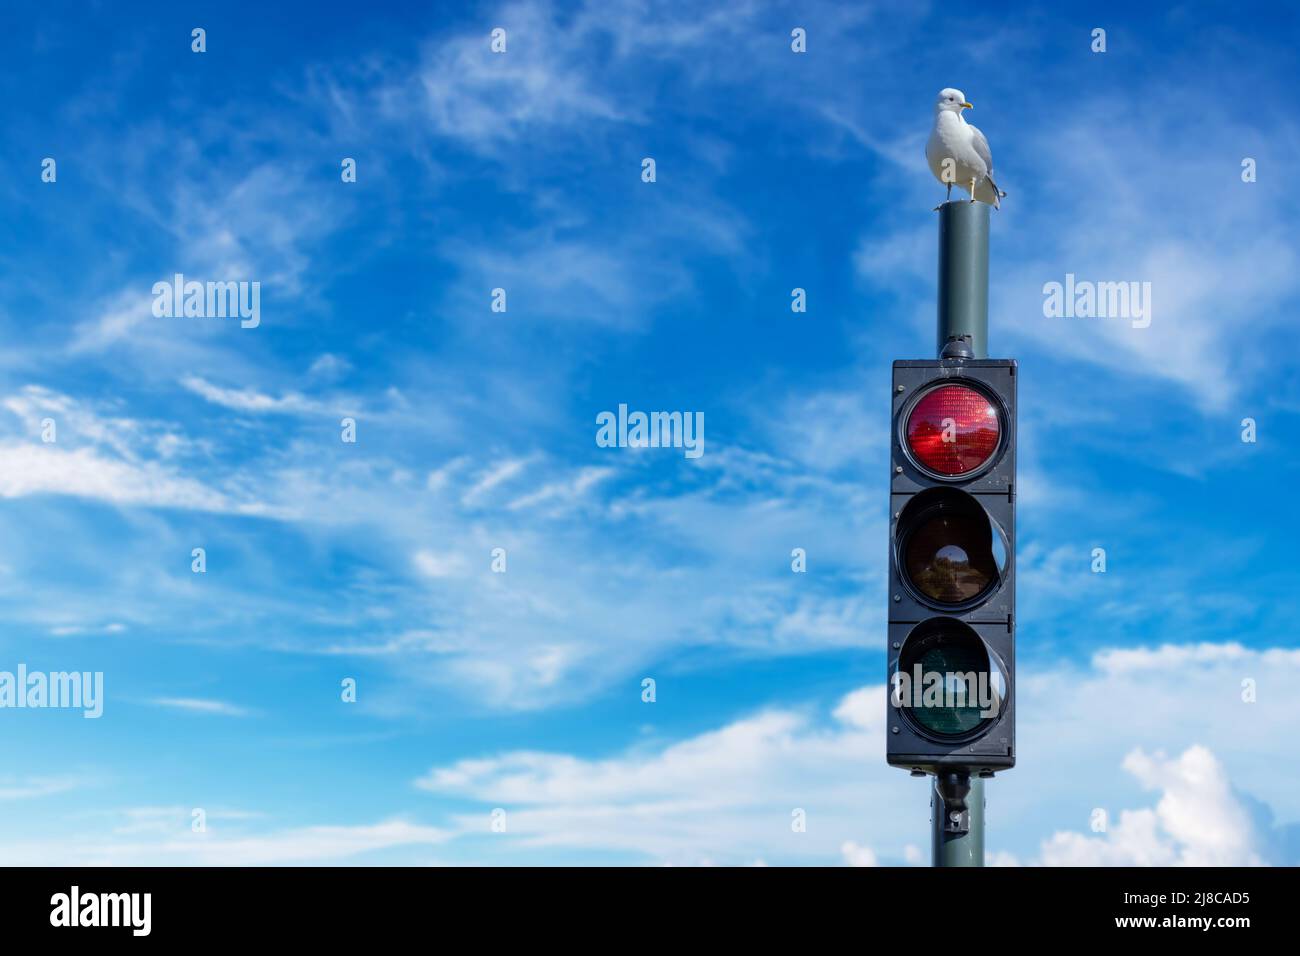 Seagull on the top of traffic light. Lofoten is an archipelago in the county of Nordland, Norway. Stock Photo